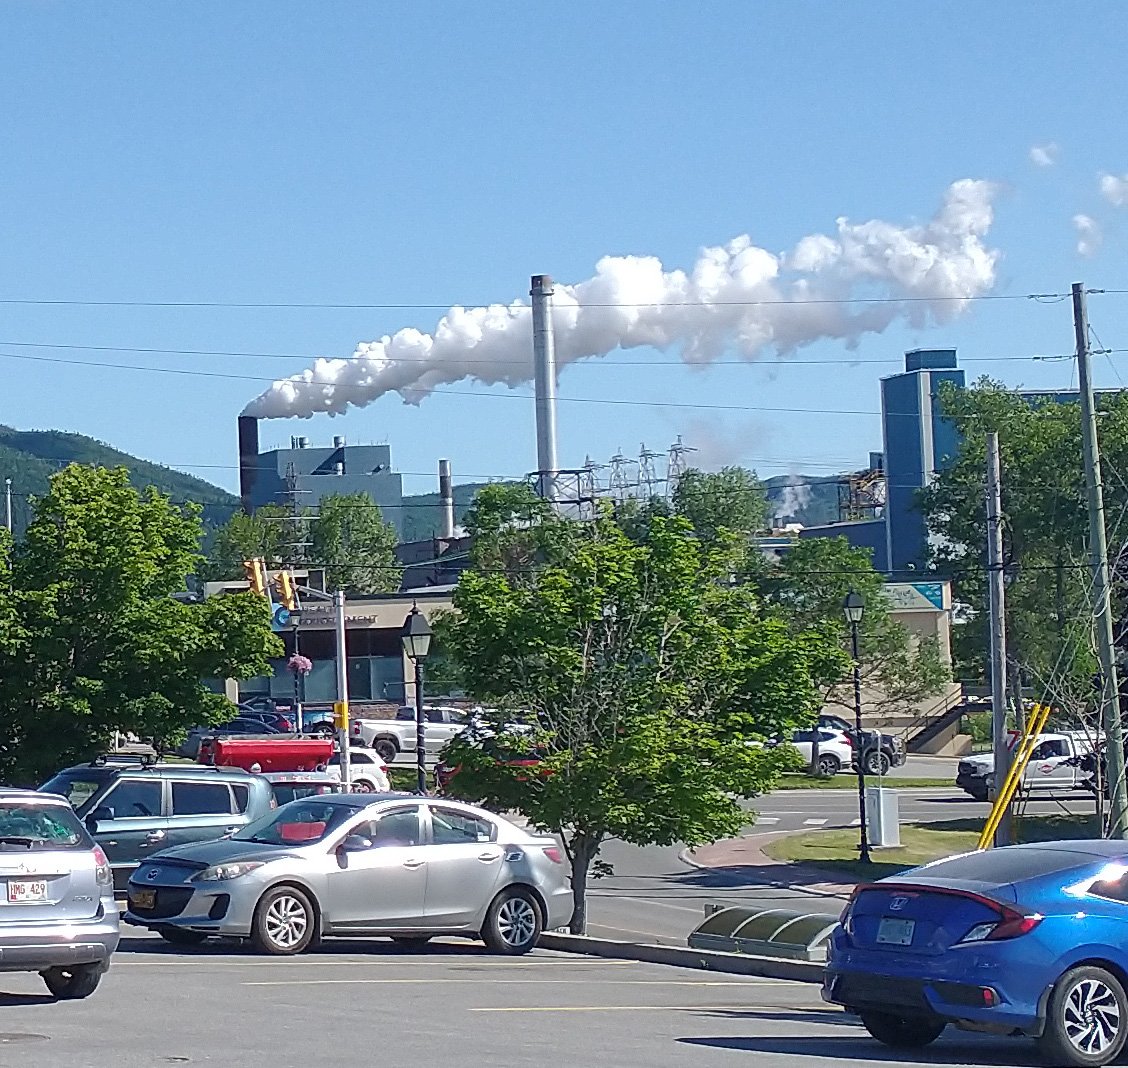 Spent the night in Corner Brook. It's a town built on cliffs around a harbor with this factory spewing this huge thick smoke... Looks healthy. 